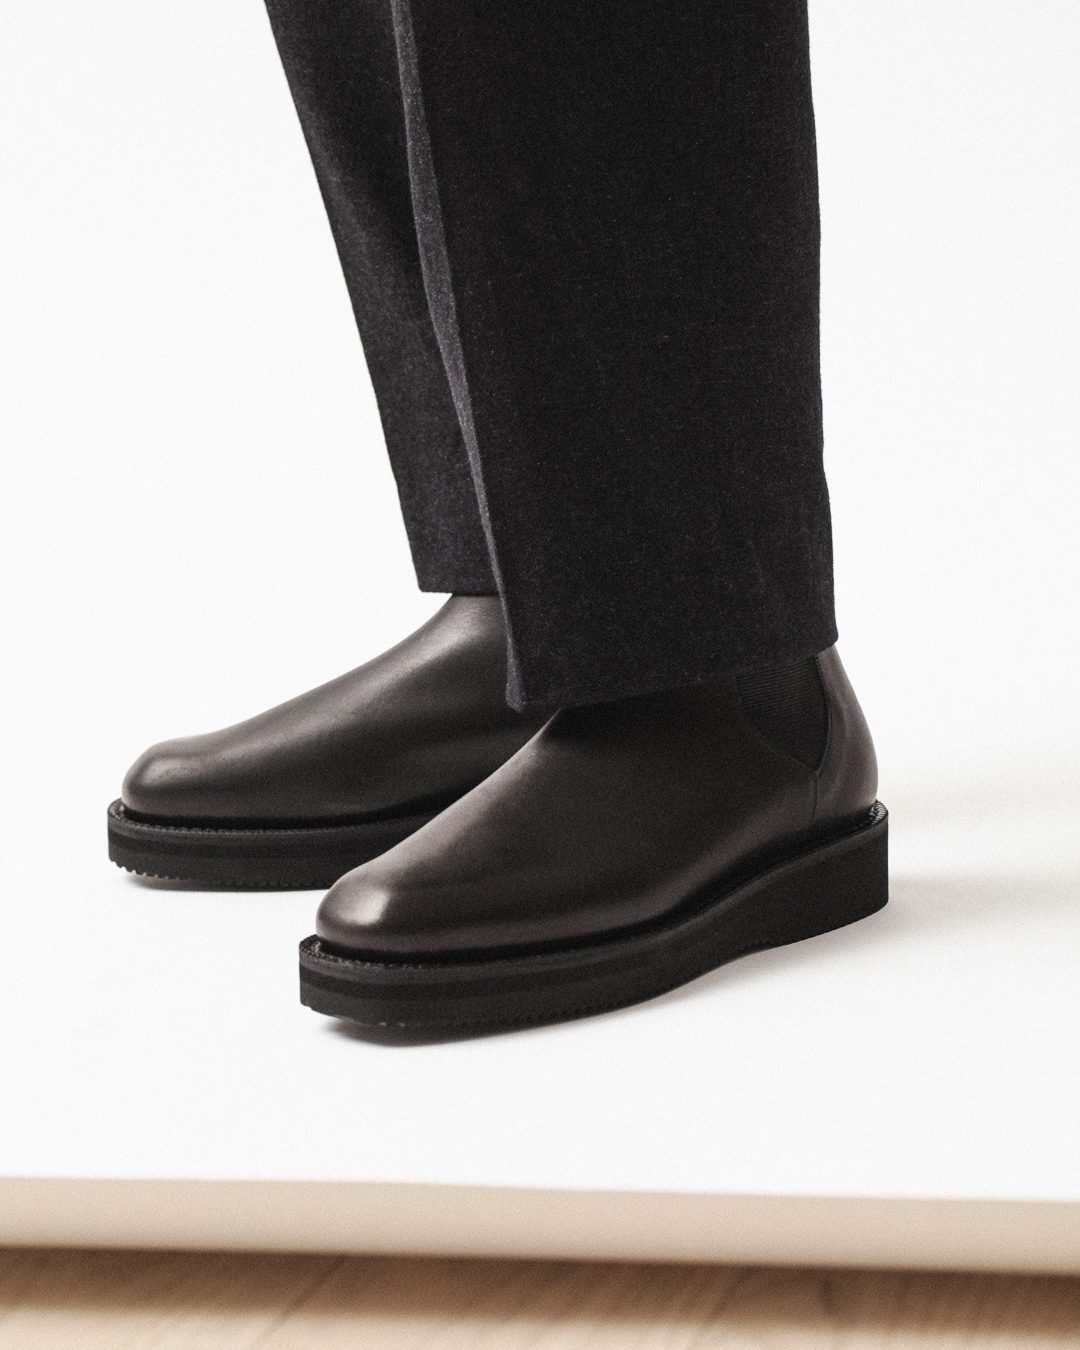 Norse Store | Shipping Worldwide - Auralee LEATHER SQUARE BOOTS 